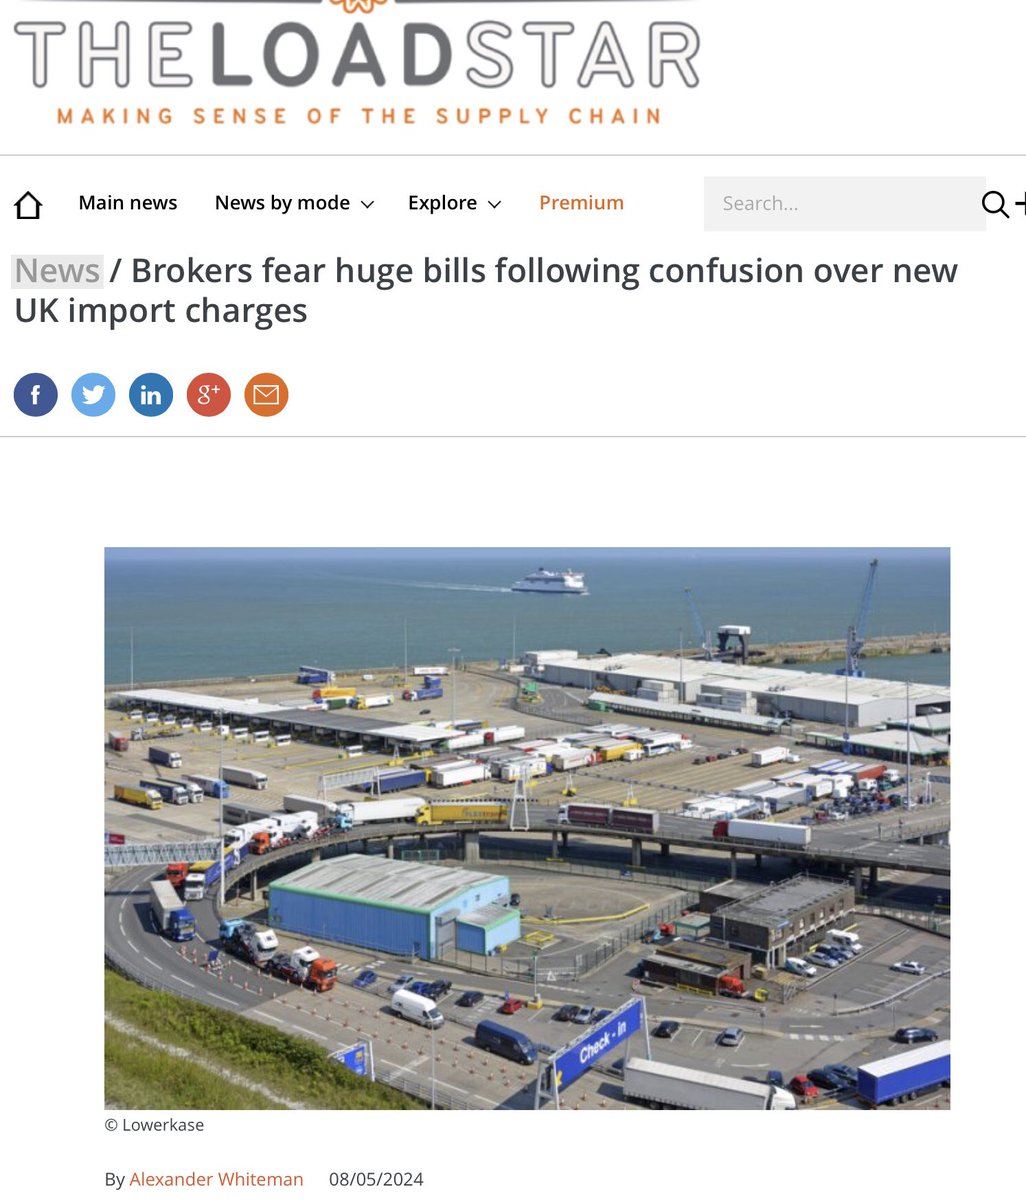 Guess what. The Brexiters new “world class” border controls are going to cost. It’s just a pity their witless incompetence can’t just affect them #BrexitDisaster theloadstar.com/brokers-fear-h…